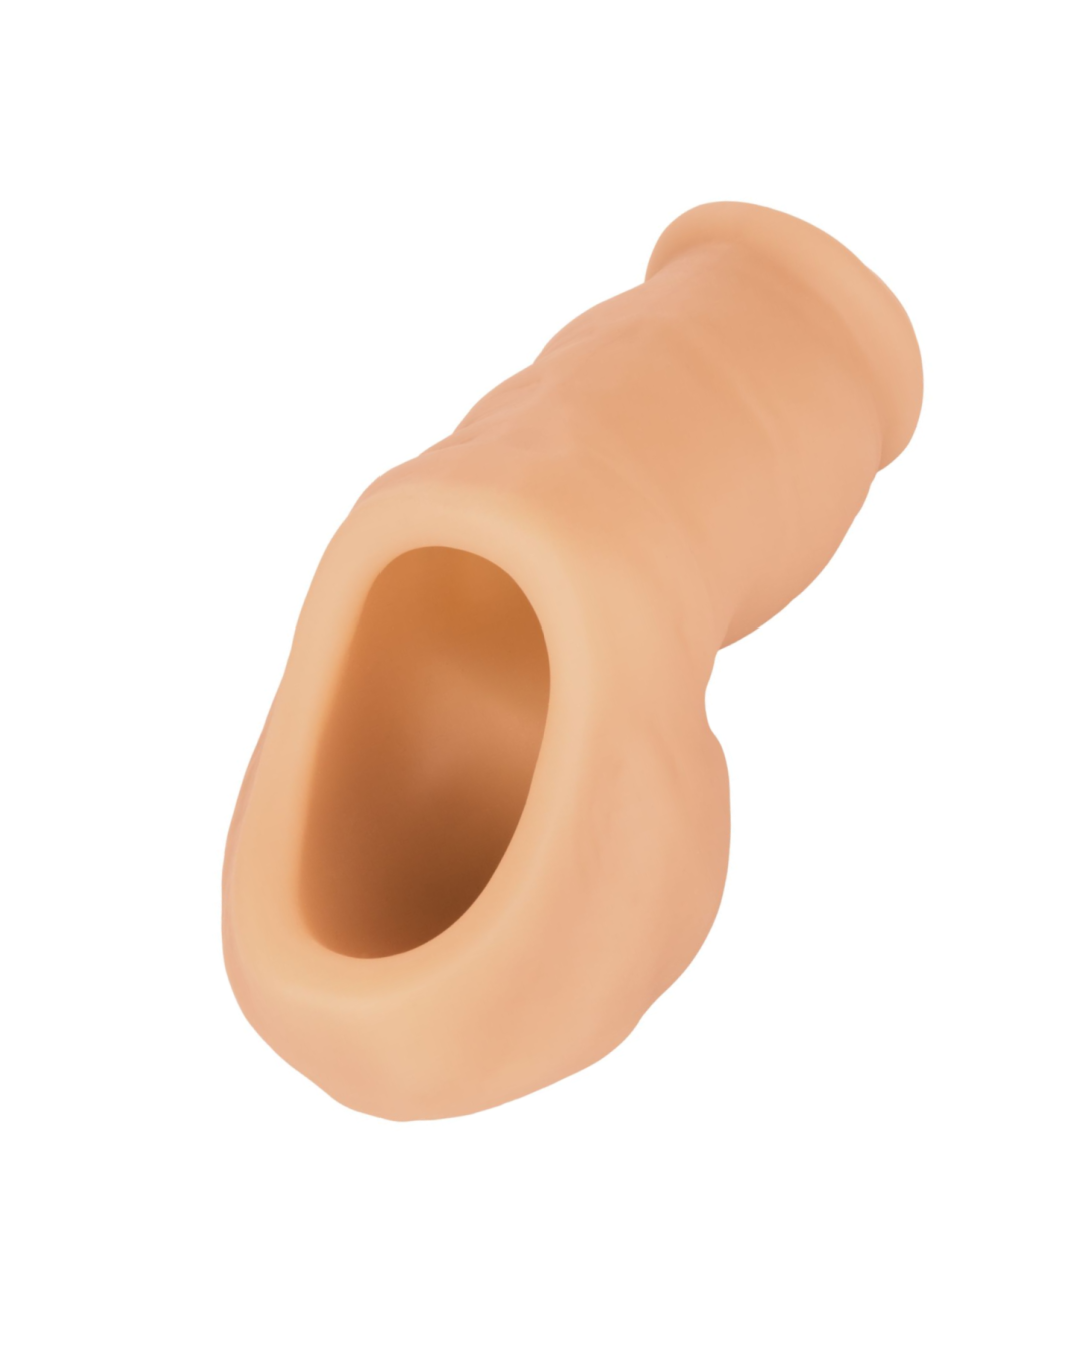 Packer Gear STP Stand To Pee Hollow Silicone Packer - Vanilla